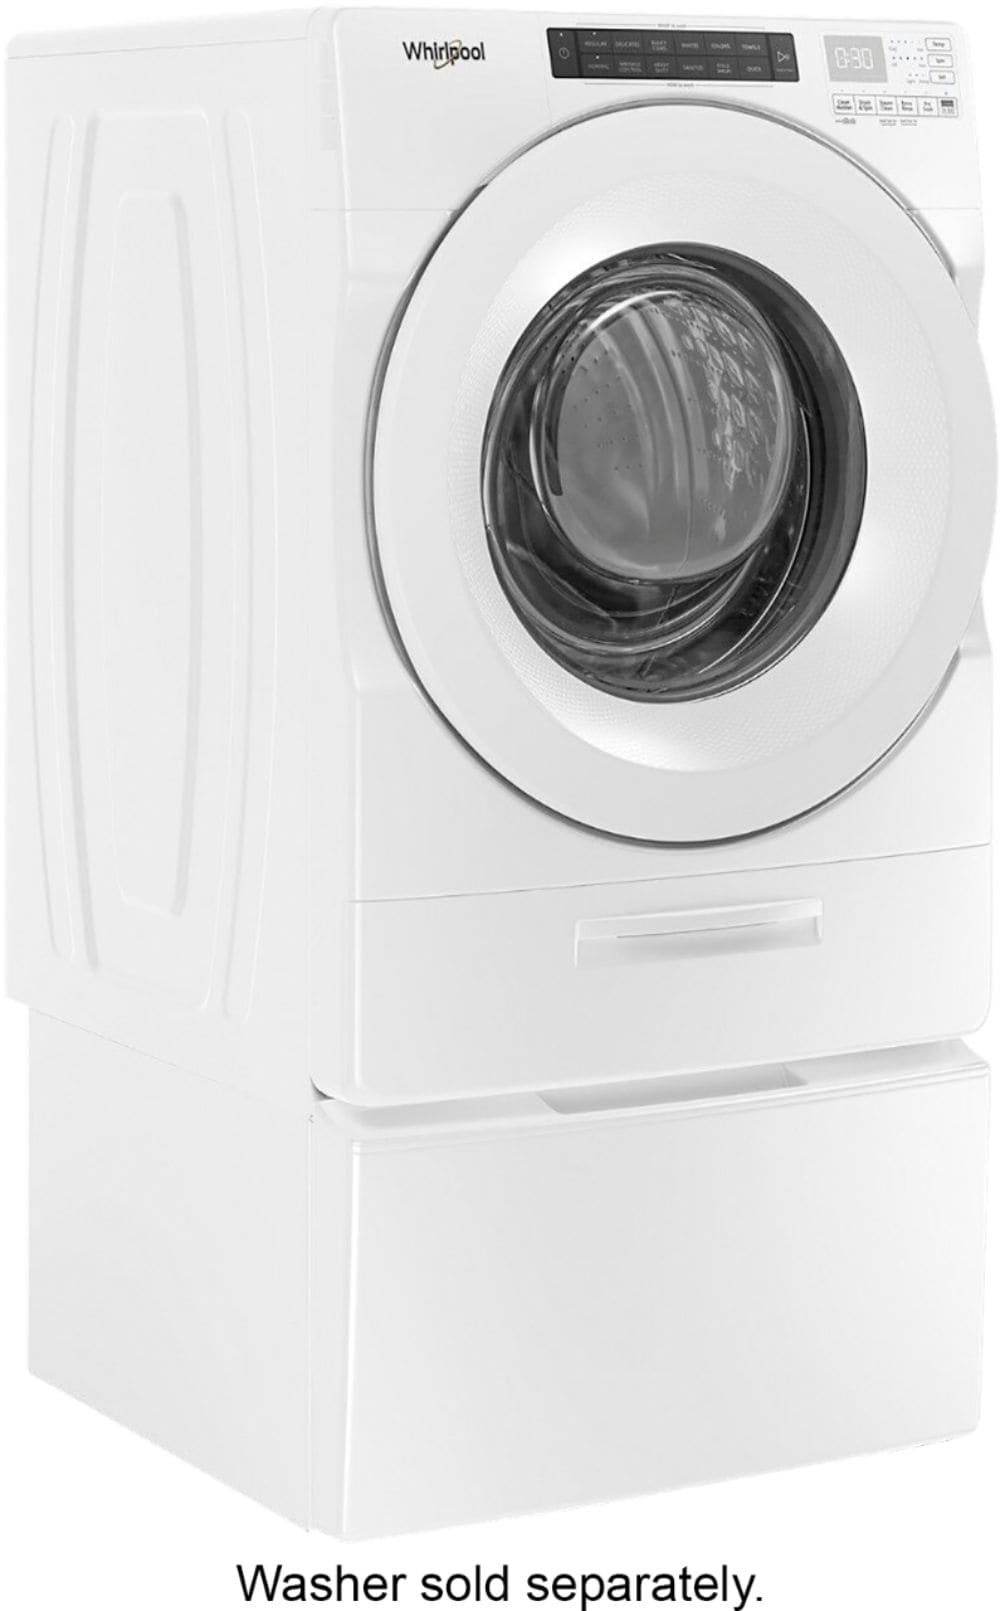 Whirlpool - Washer/Dryer Laundry Pedestal with Storage Drawer - White_10